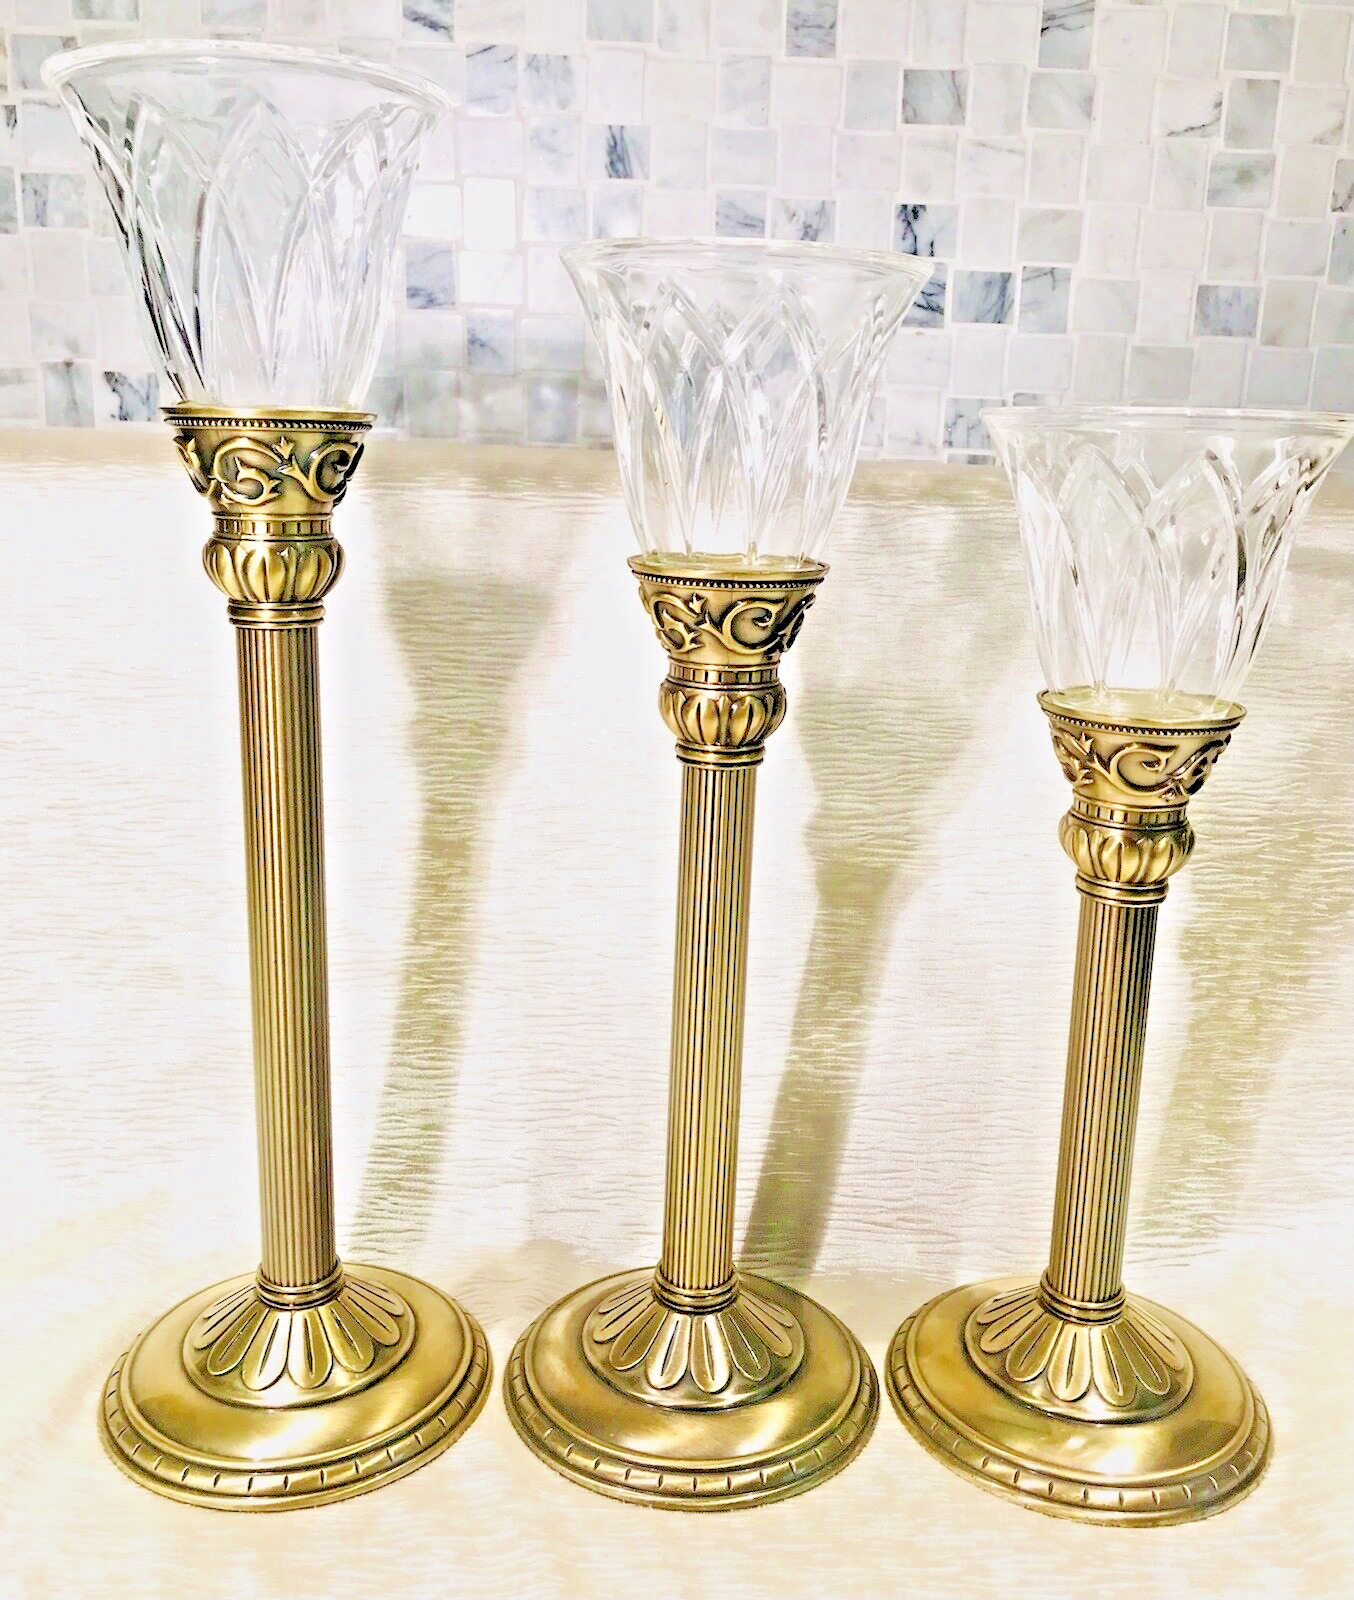 PartyLite Classic Creations Satin Gold Taper Candle Holder Set of 3 w/ Votives